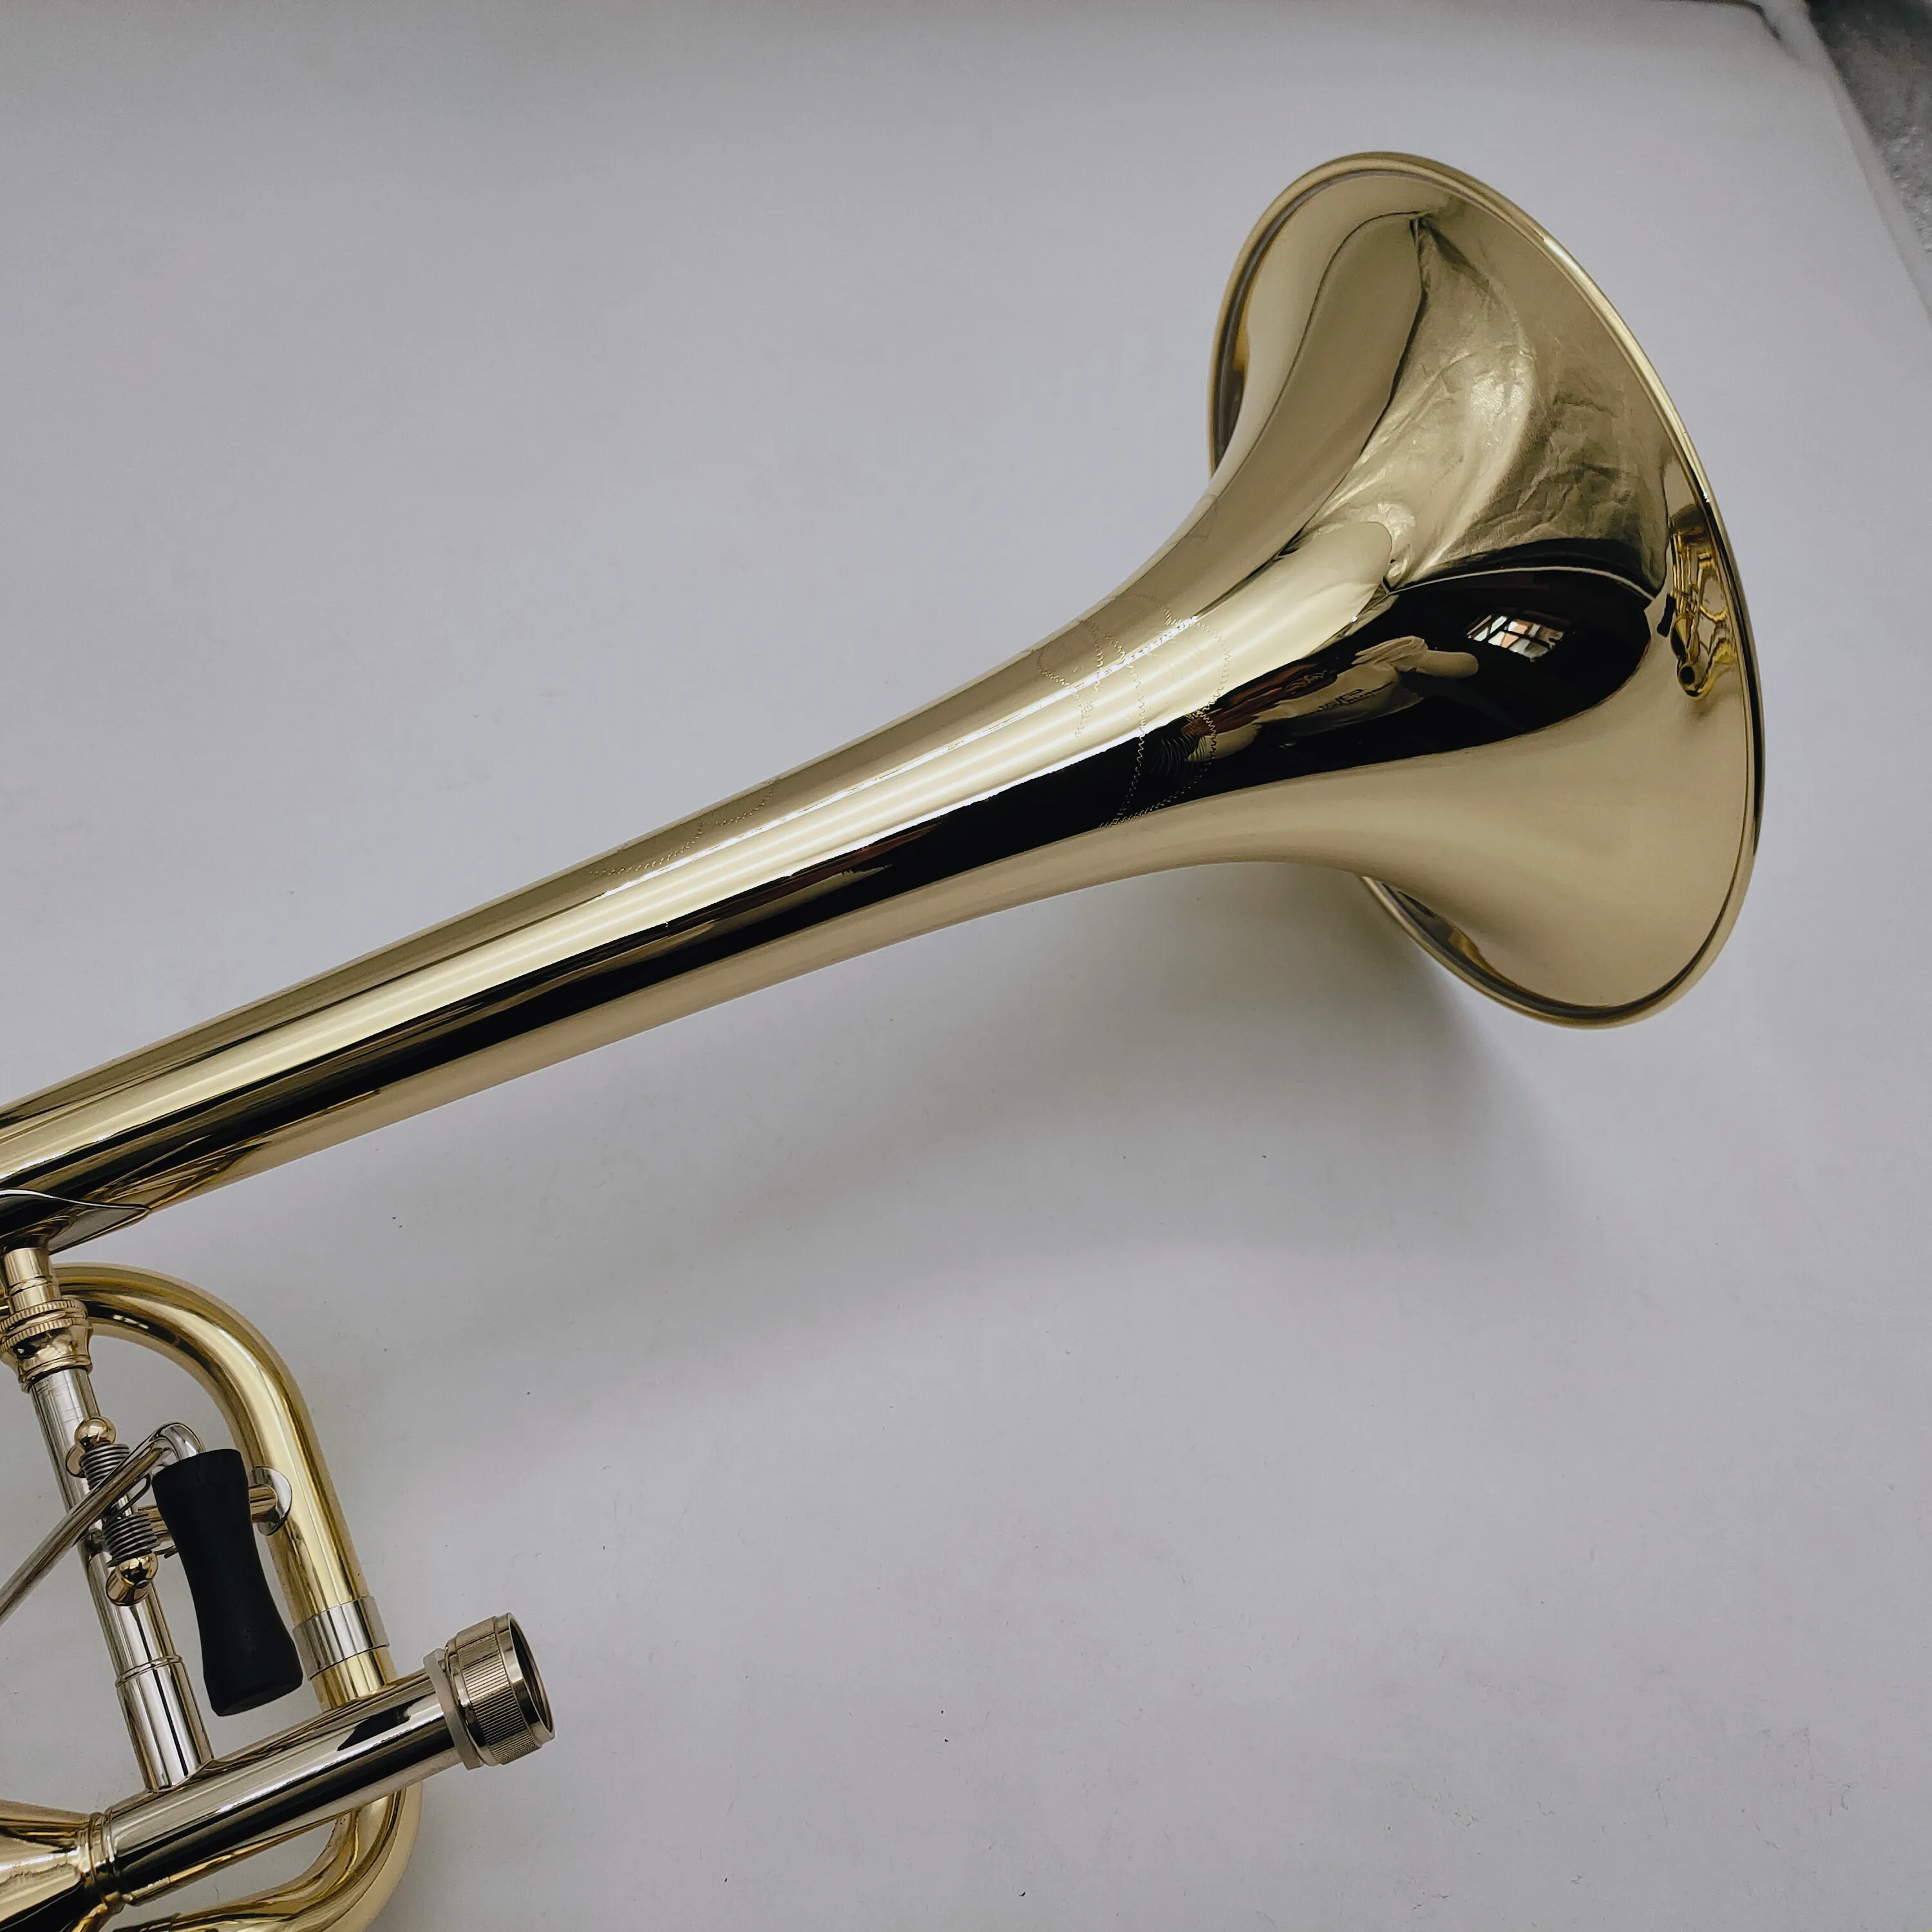 Professional Gold Brass Plated Bb F# Tenor Trombone Shorty Trumpet With  Case, Mouthpiece, And Accessories By MARGEWATE From Wu880126, $768.25